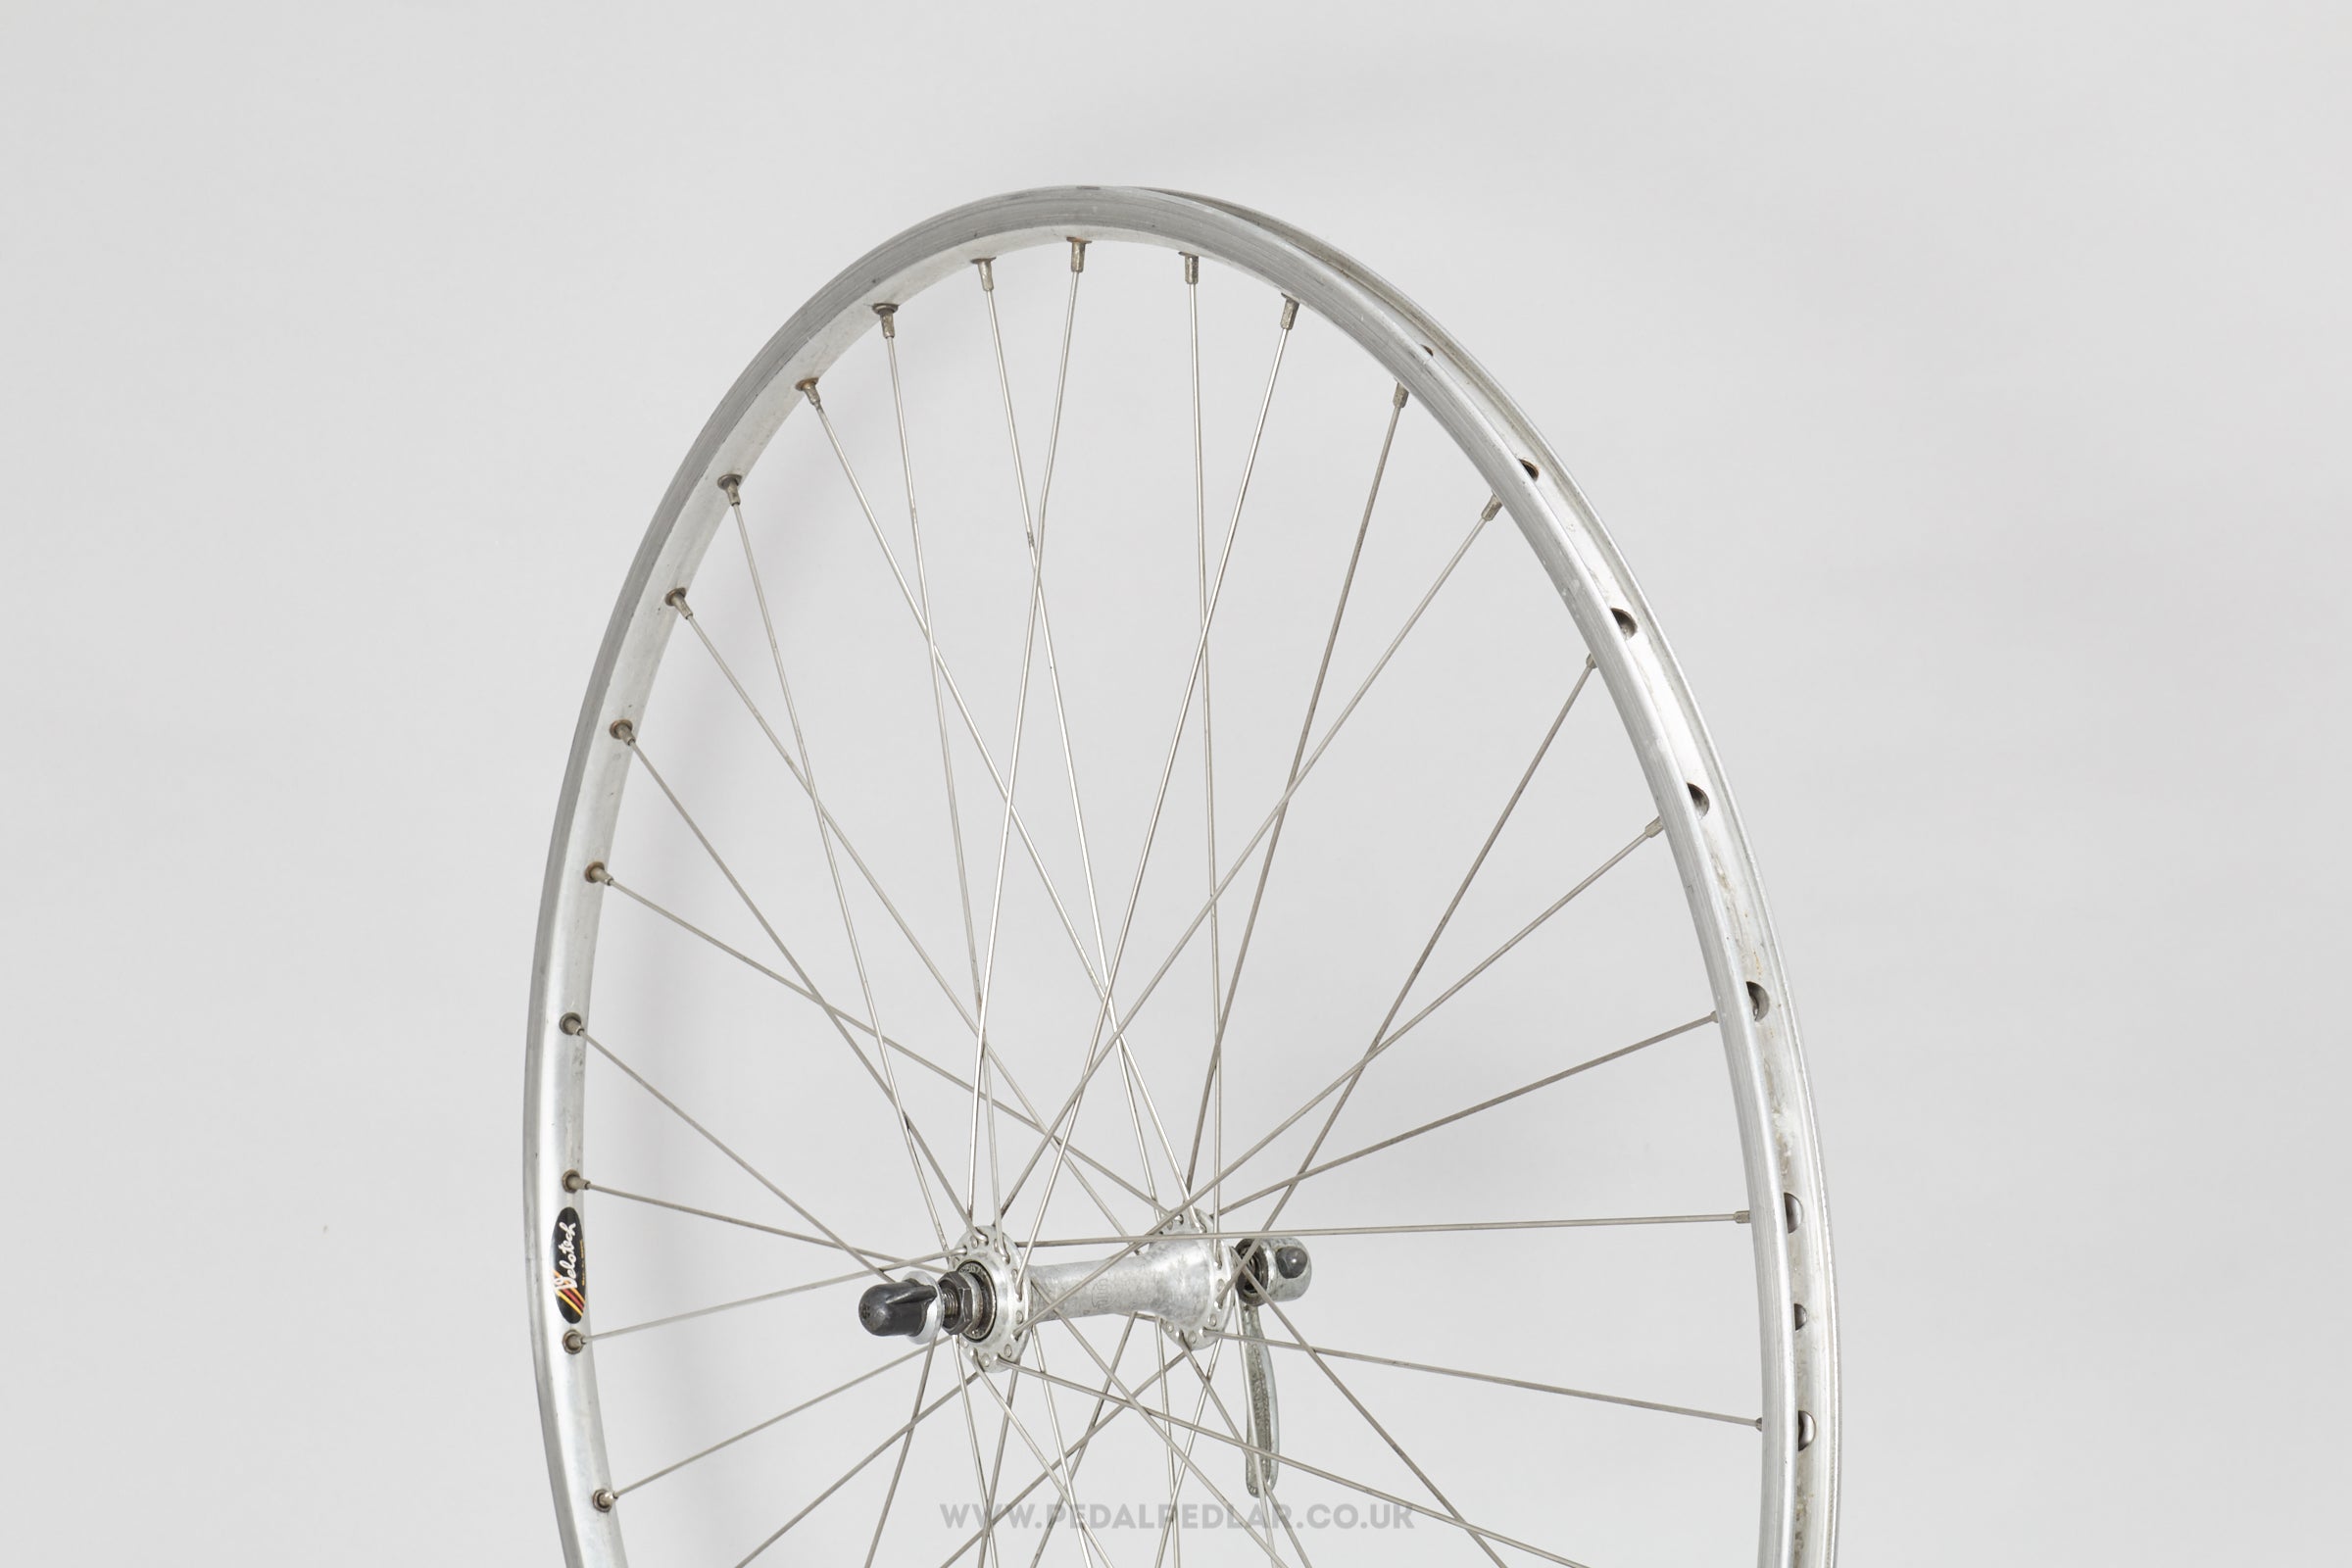 Maillard Small Flange / Velotech by Mavic c.1986 Vintage 700c Clincher Road Front Wheel - Pedal Pedlar - Bicycle Wheel For Sale